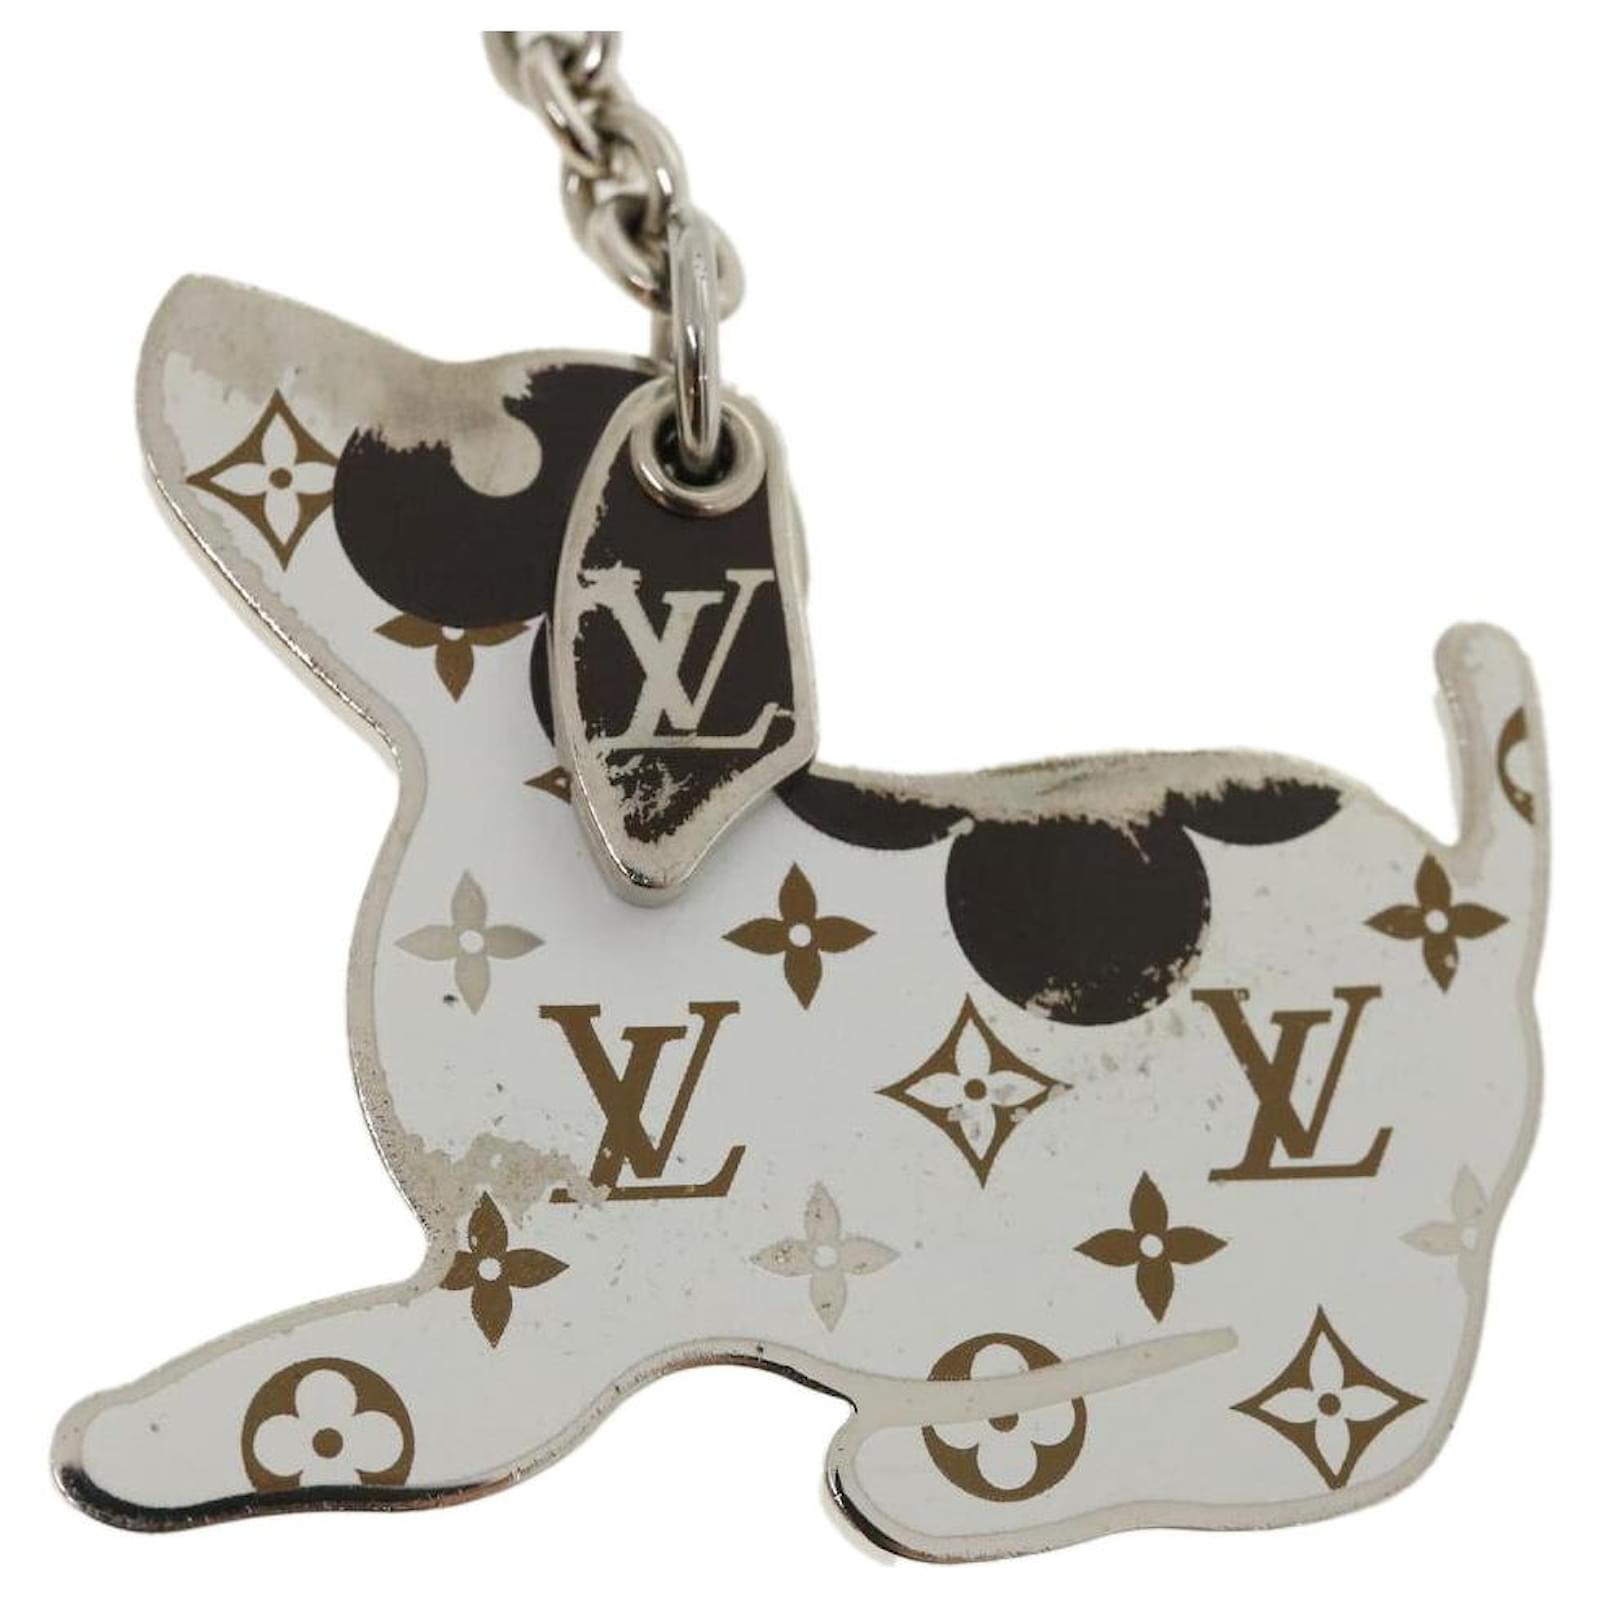 LOUIS VUITTON Blown Up Figurine Key Holder And Bag Charm Silver Metal